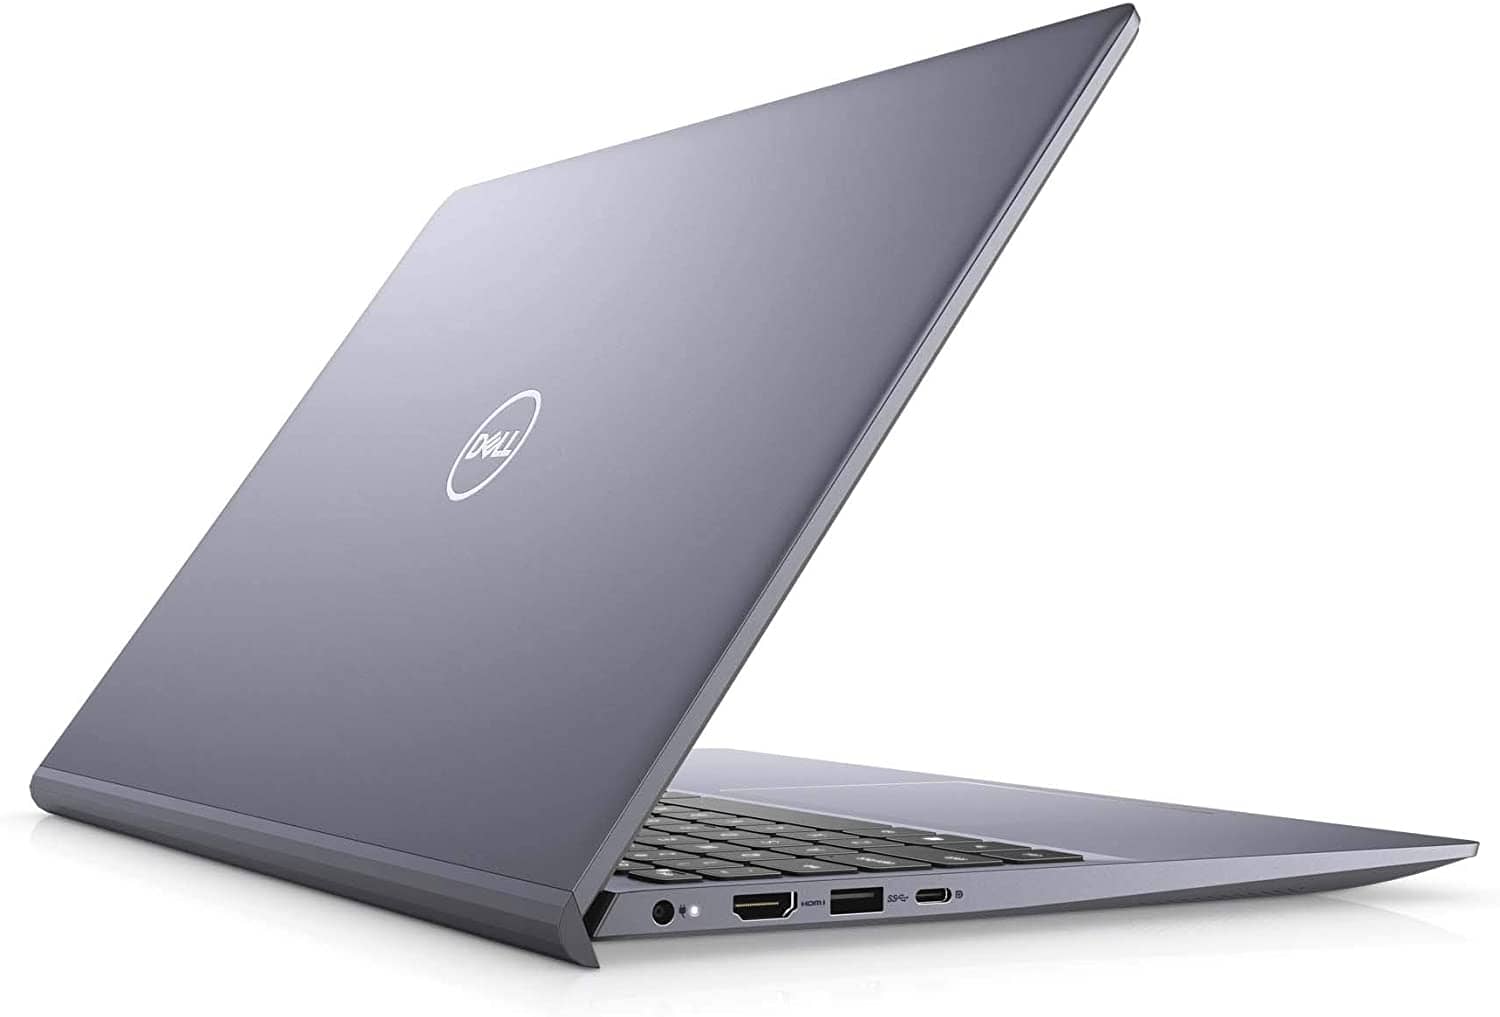 Dell Inspiron 14 5406 2in1 14-inch FHD Touch Laptop - Intel Core i7-1165G7 12GB 3200MHz DDR4 RAM 512GB SSD Iris Xe Graphics Windows 10 Home - Titan Grey (Latest Model) - DealYaSteal